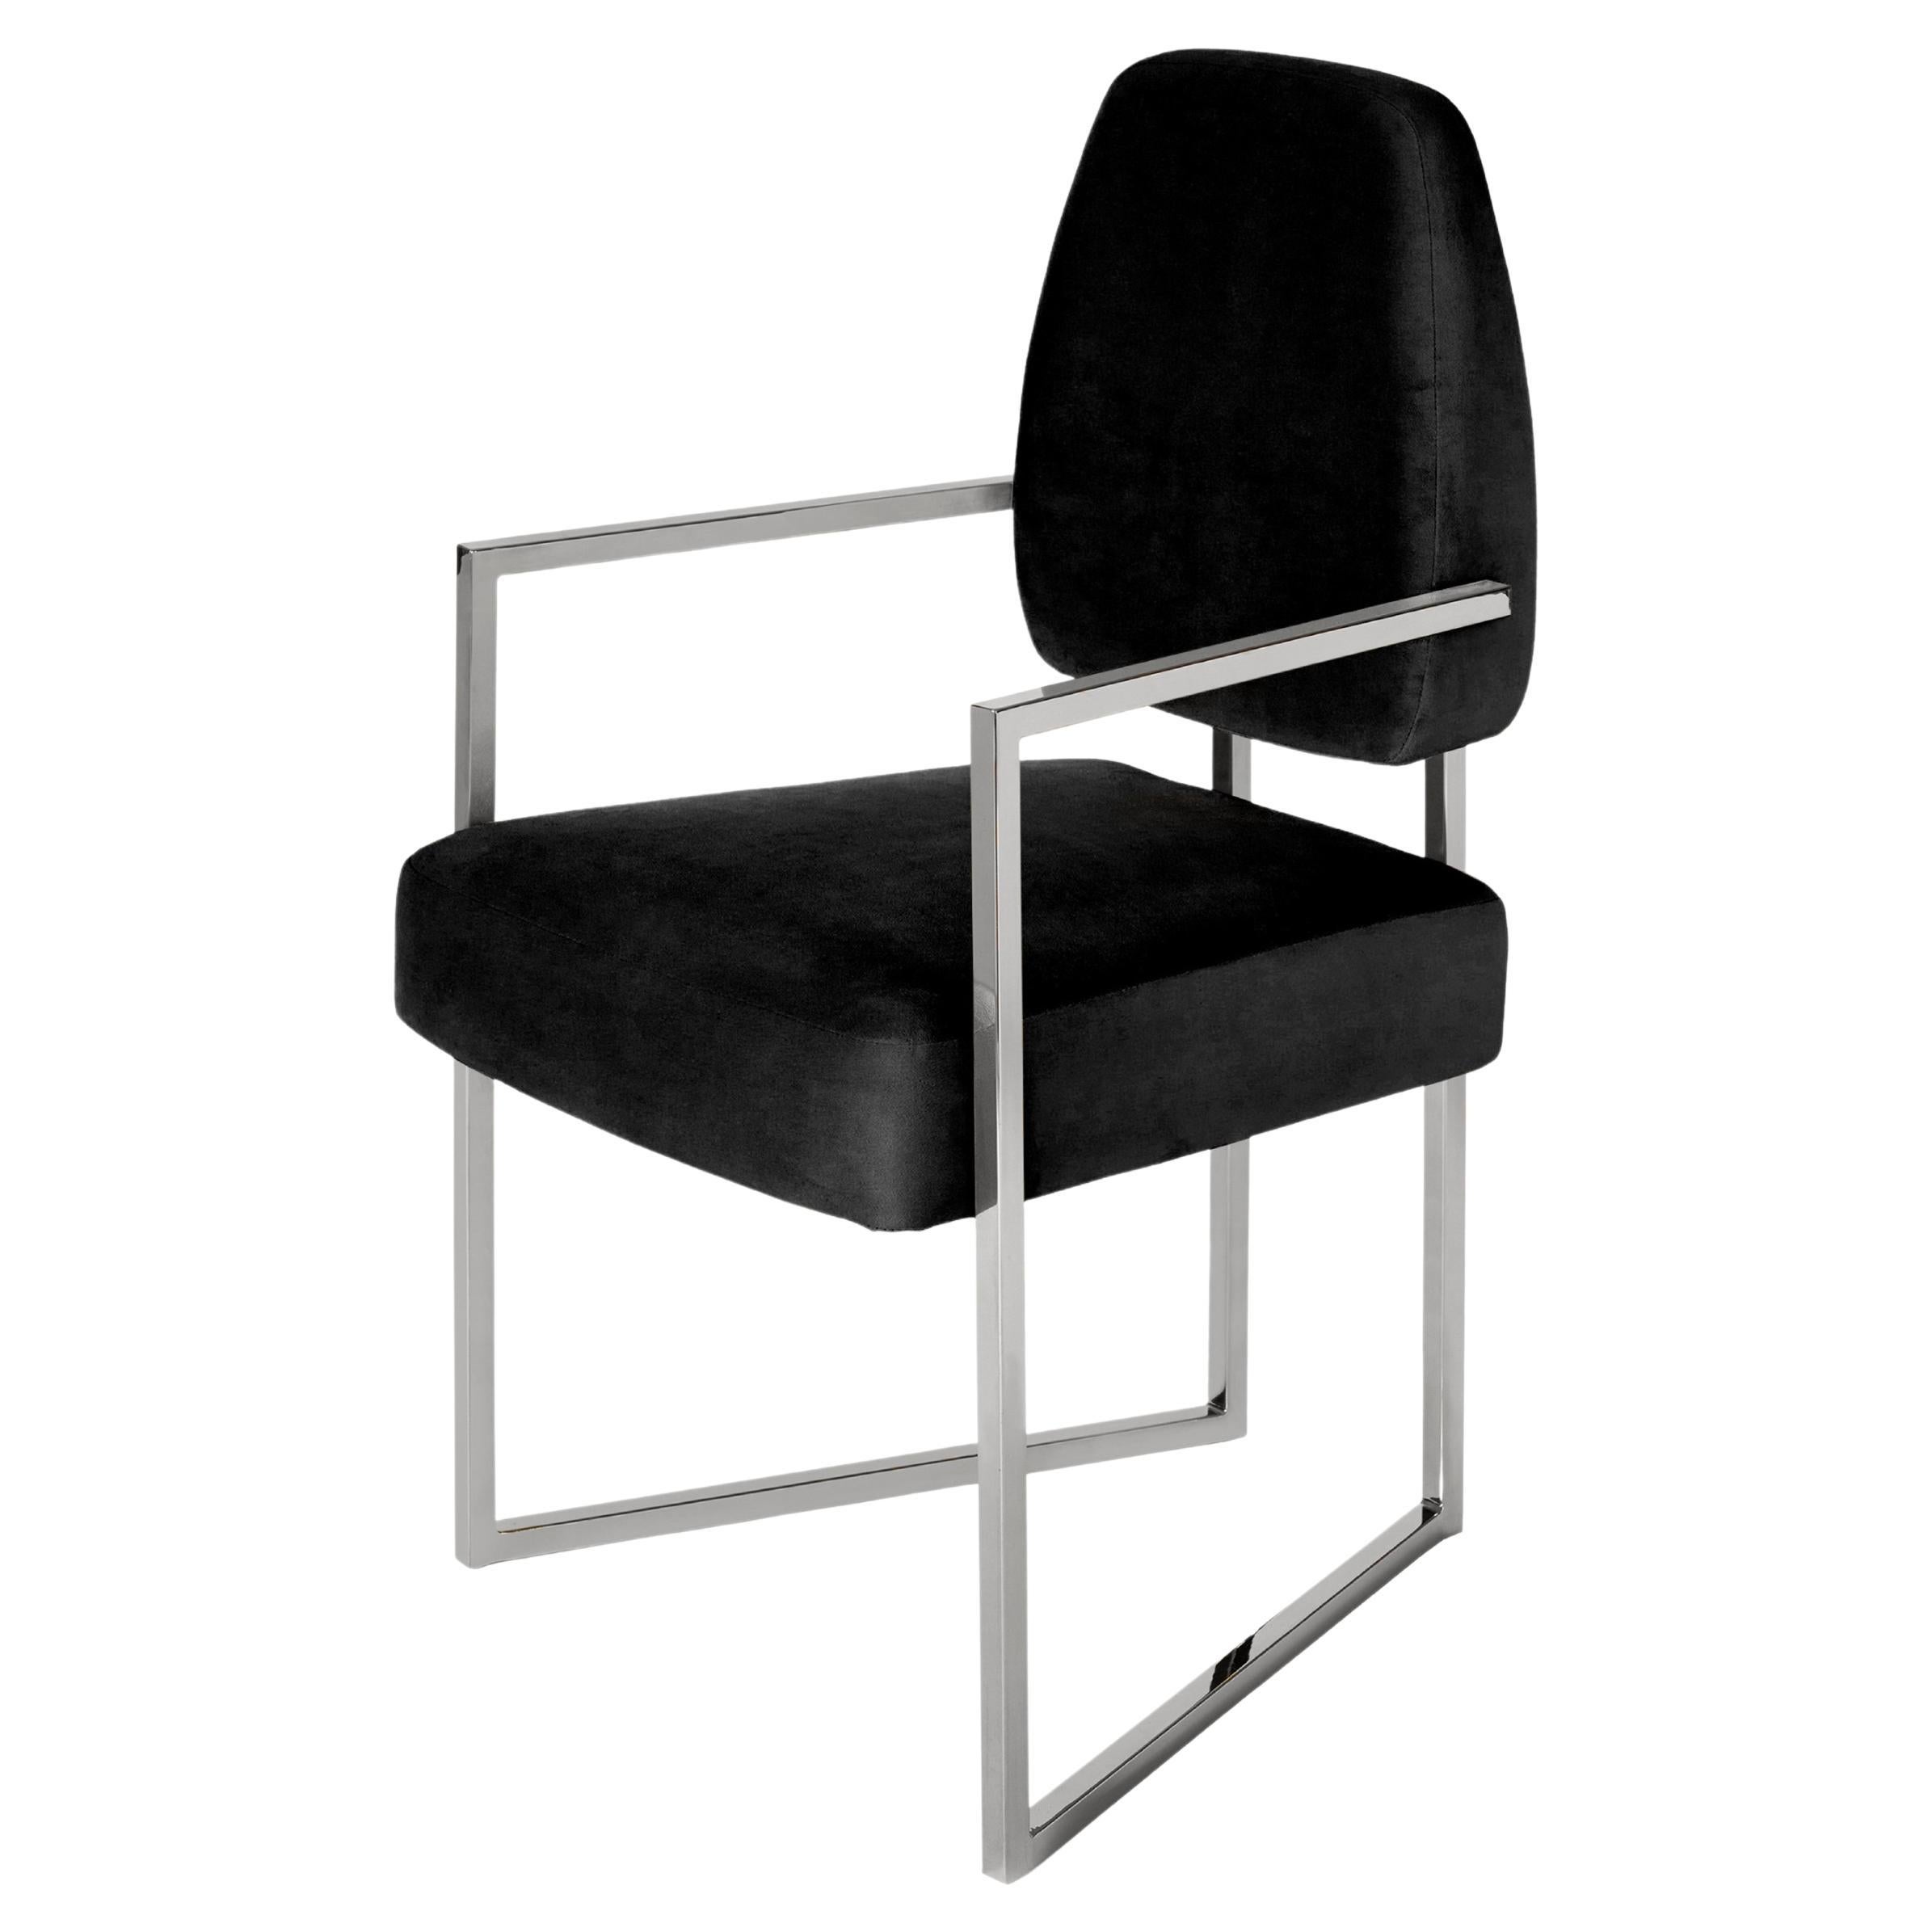 Perspective Dining Chair, Velvet and Steel, InsidherLand by Joana Santos Barbosa For Sale